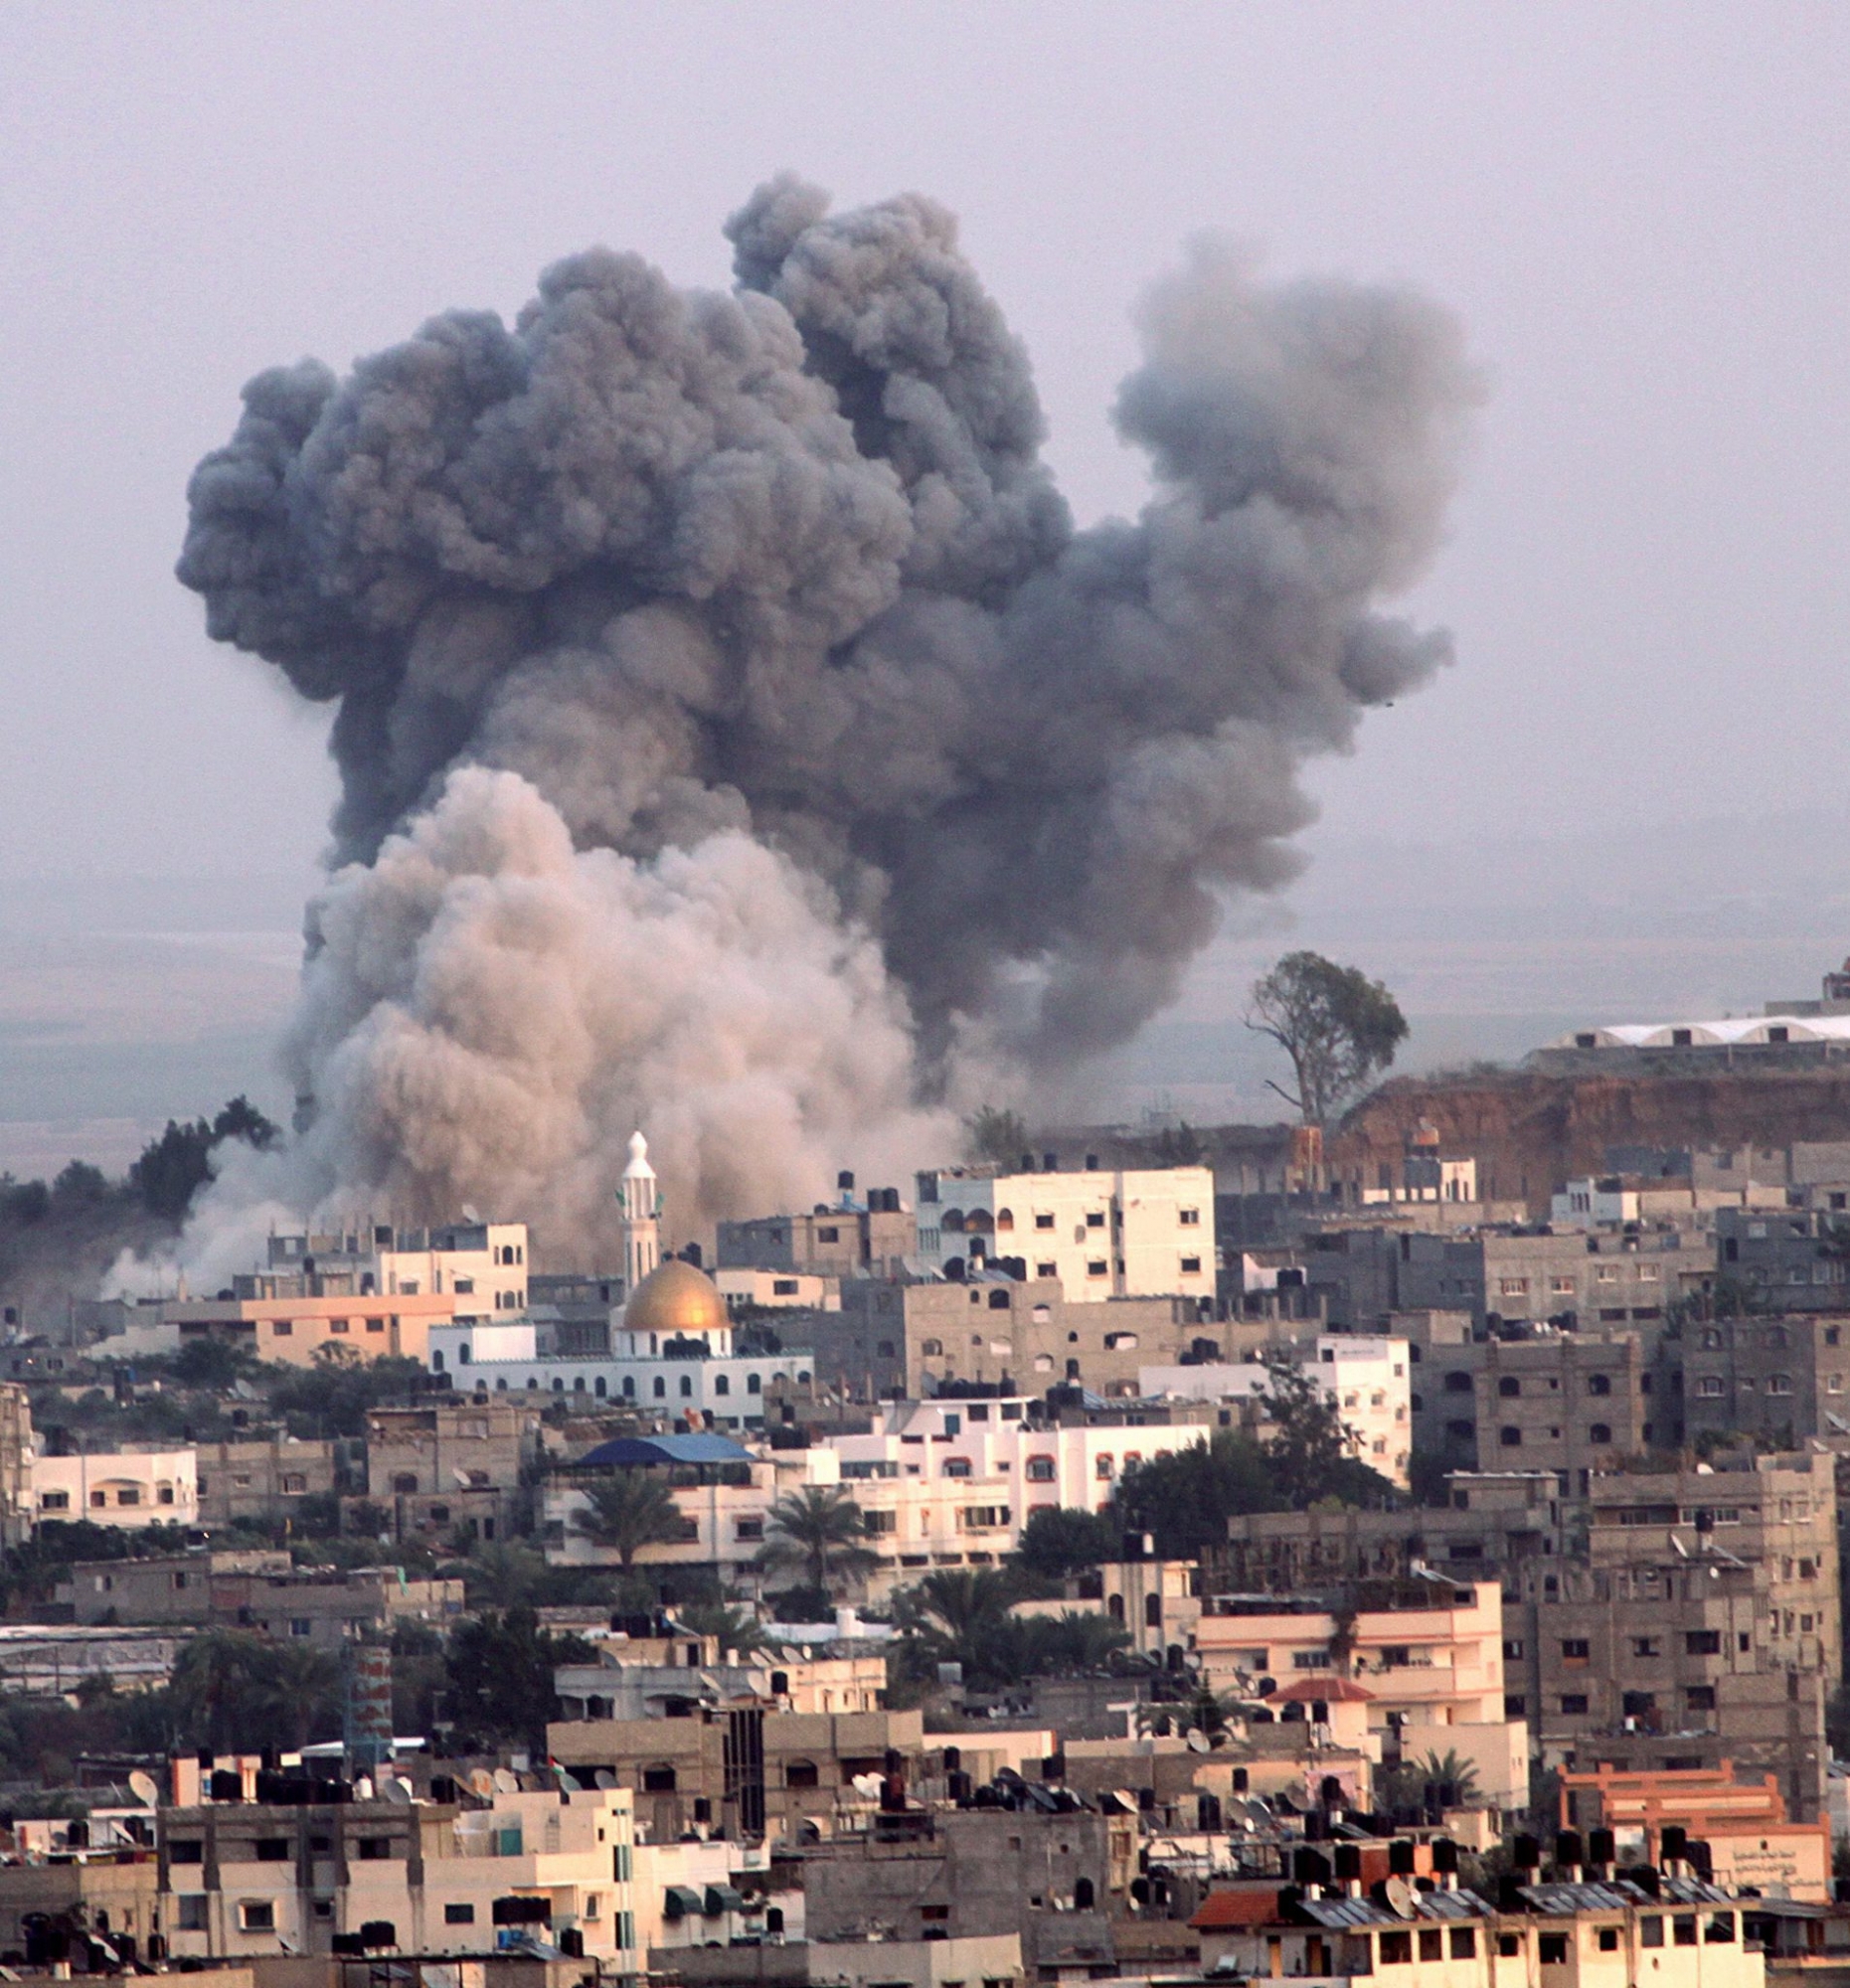 epa03475134 Smoke rise from a Hamas site after an Israeli air strike in the east of Gaza City, 17 November 2012. Reports state that Haneiya's office was destroyed early on 17 November 2012 in an Israeli air strike on Gaza City. Israel has put 75,000 reservists on standby amid speculation of an impending ground invasion.  EPA/MOHAMMED SABER MIDEAST CONFLICT GAZA